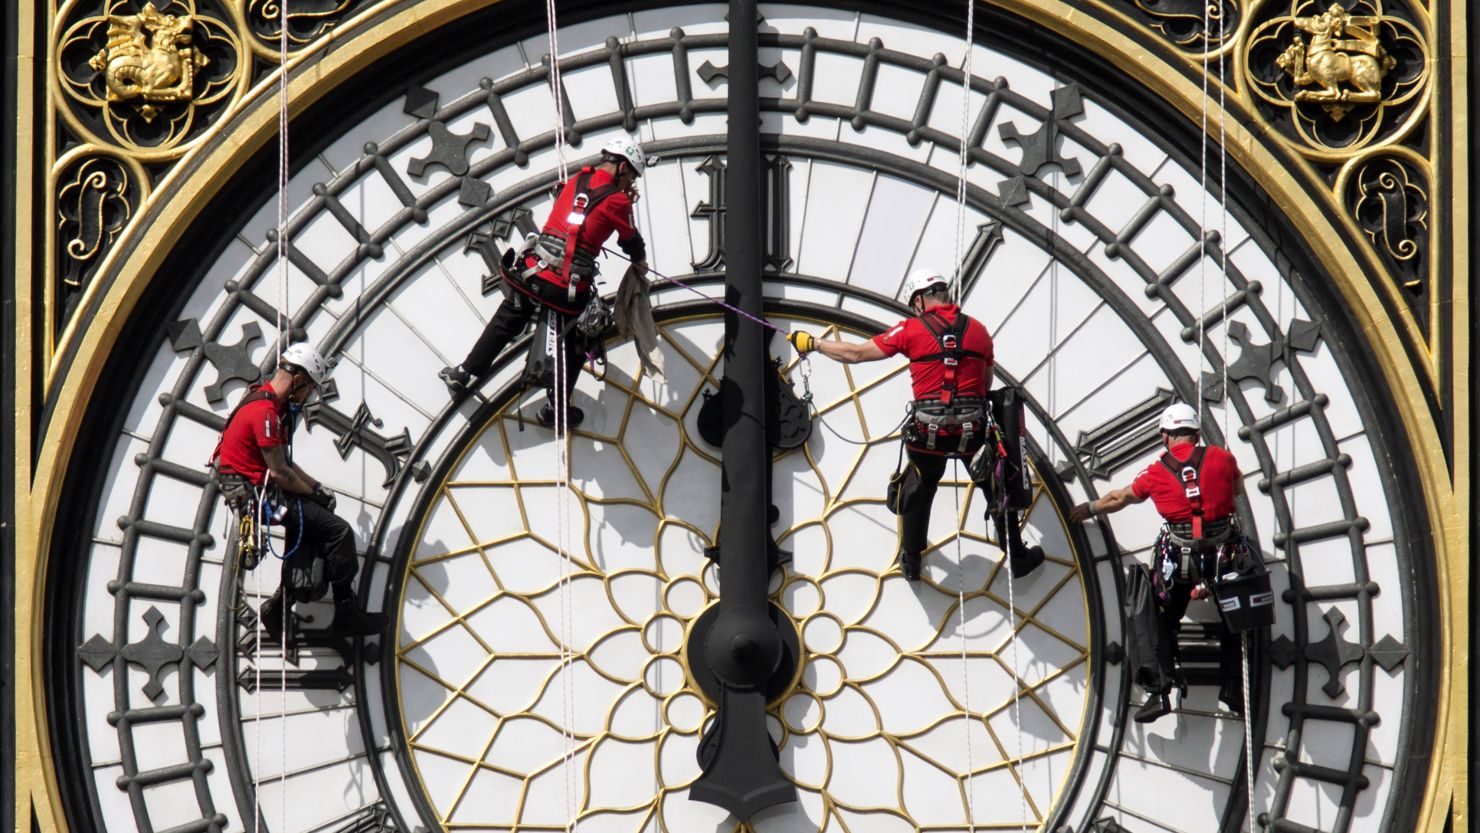 There aren't enough hours in the day, but on Tuesday you get an extra moment thanks to the "leap second."